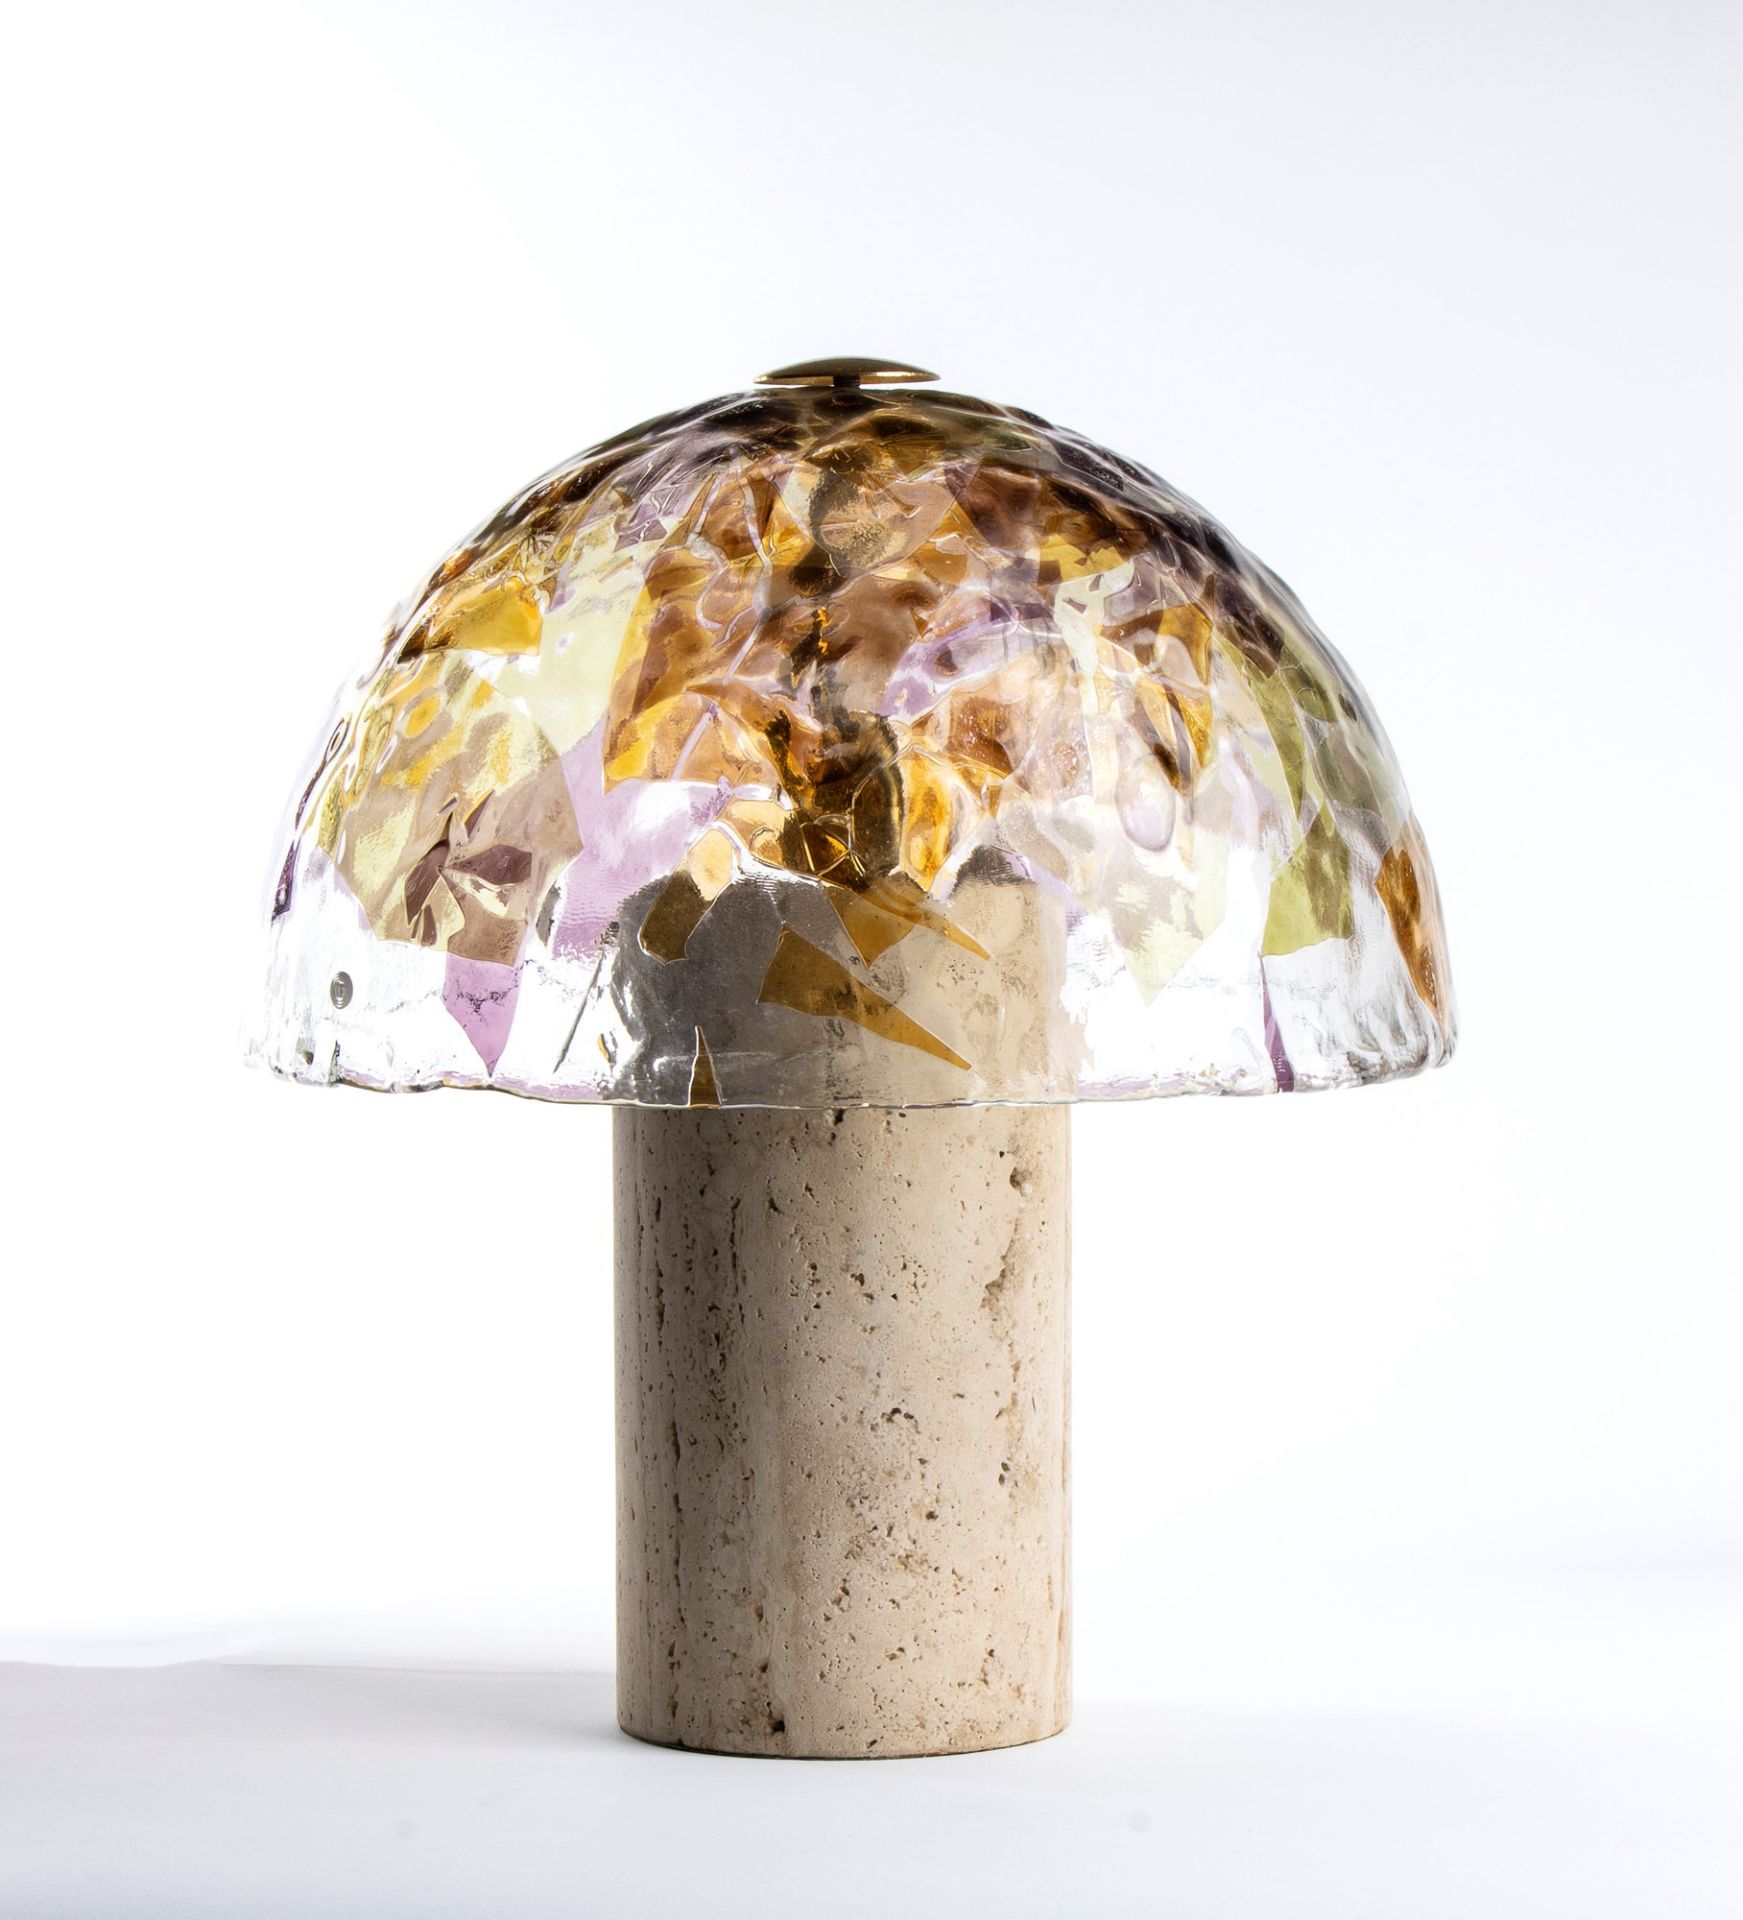 Polychrome blown glass table lamp by La Murrina - Image 7 of 15